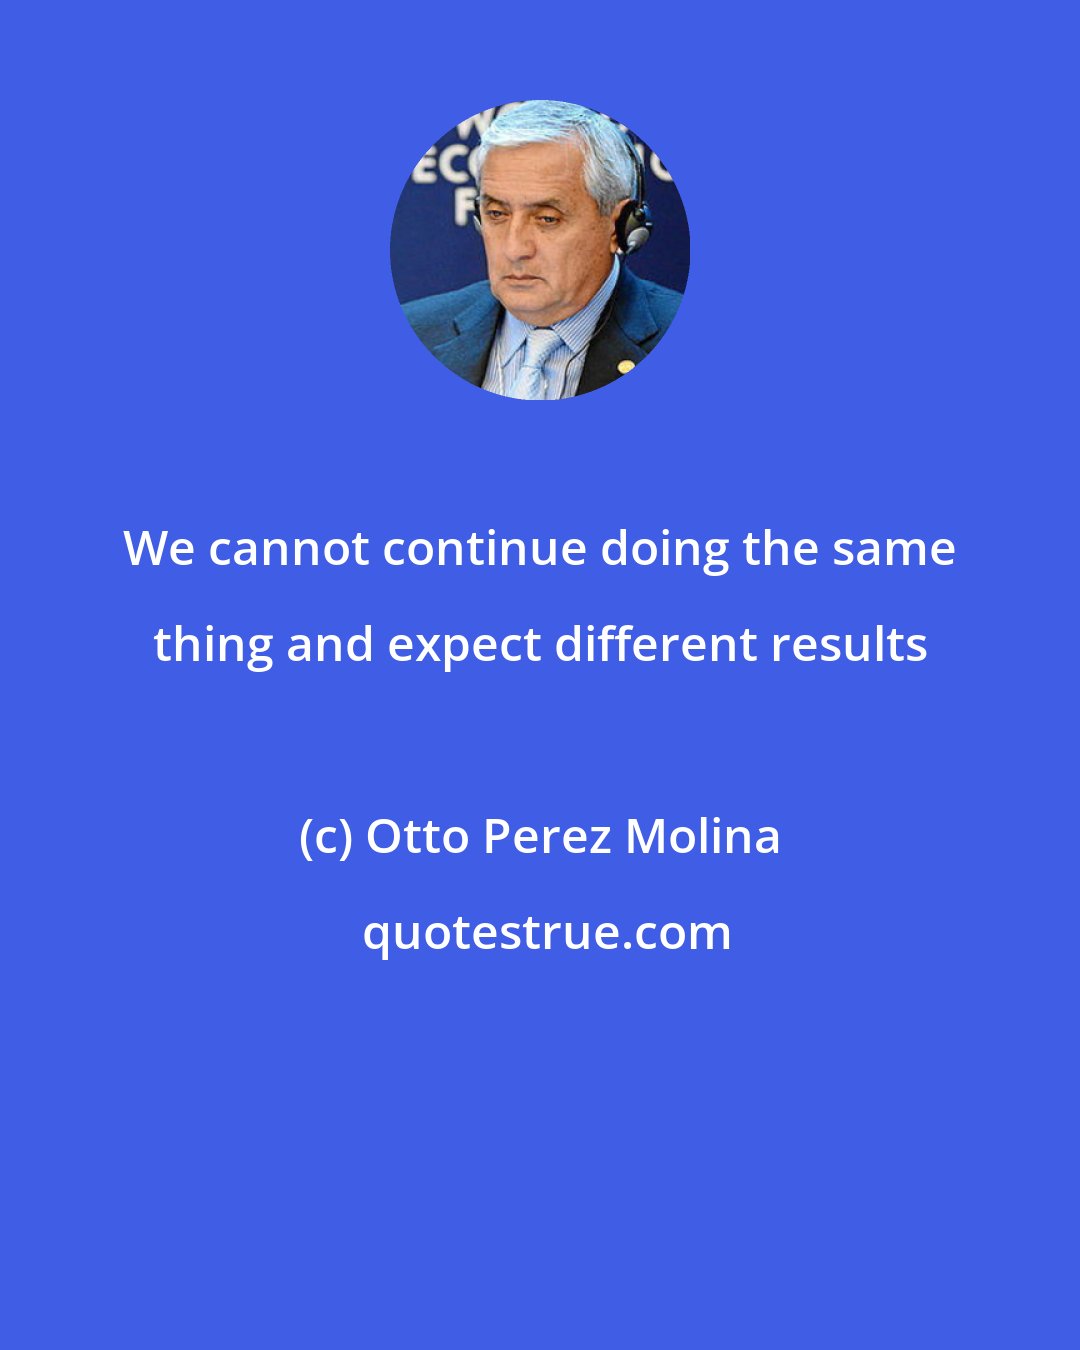 Otto Perez Molina: We cannot continue doing the same thing and expect different results